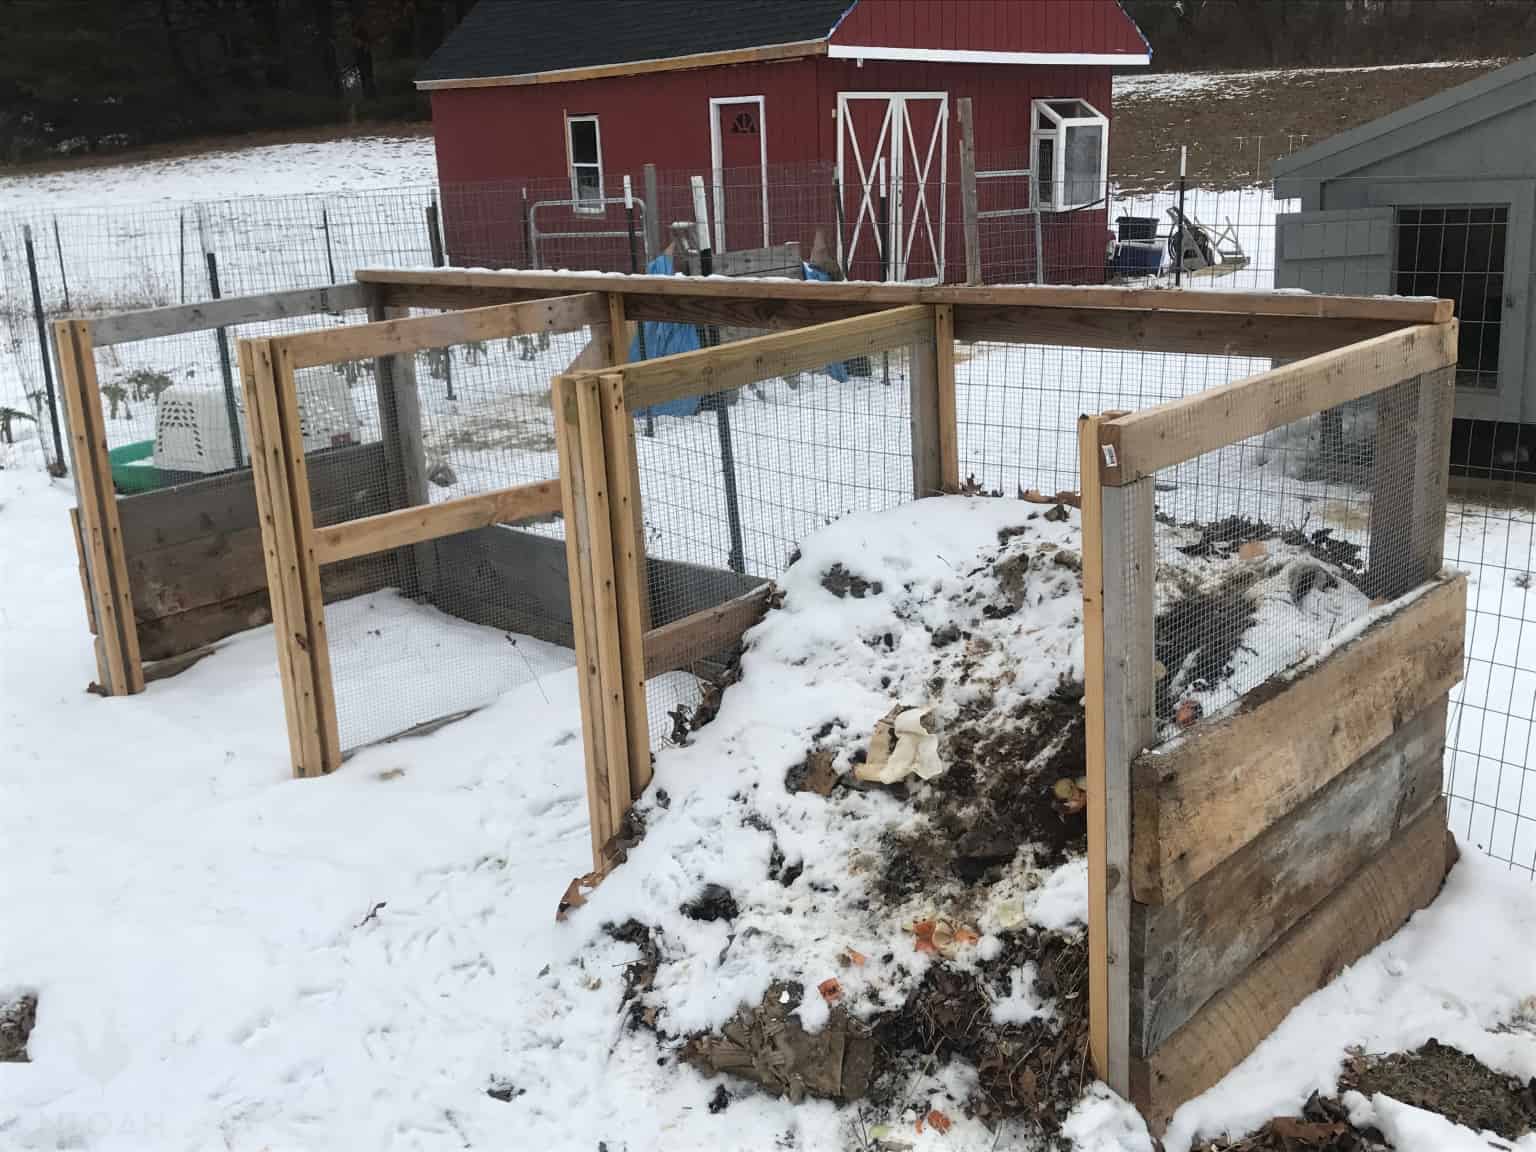 a 3-bin composter made of scrap wood and wire mesh on the winter homestead